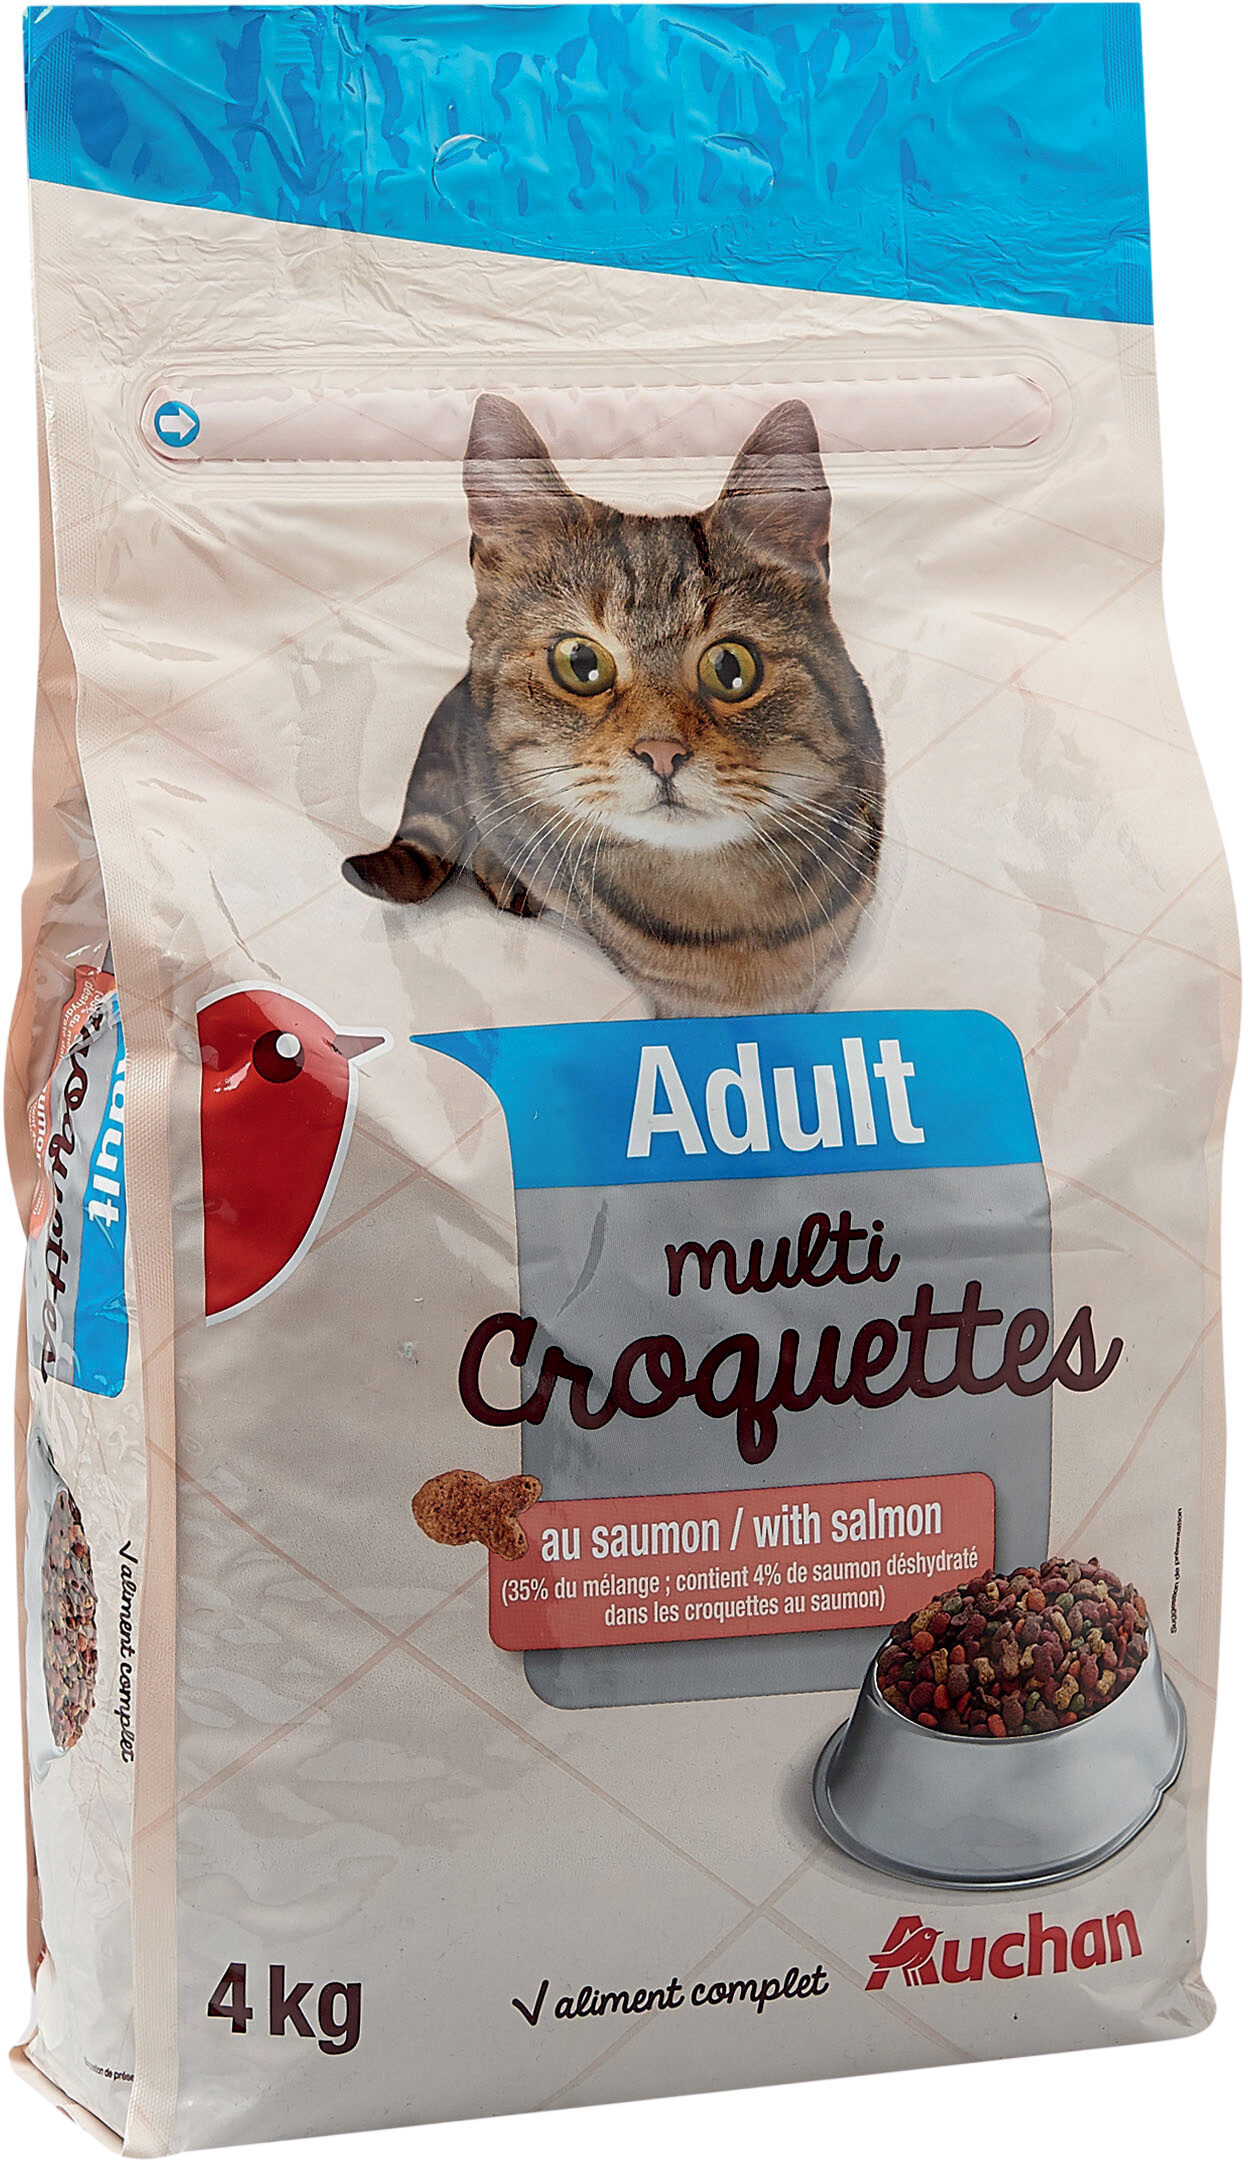 Adult Multi croquettes - Product - fr